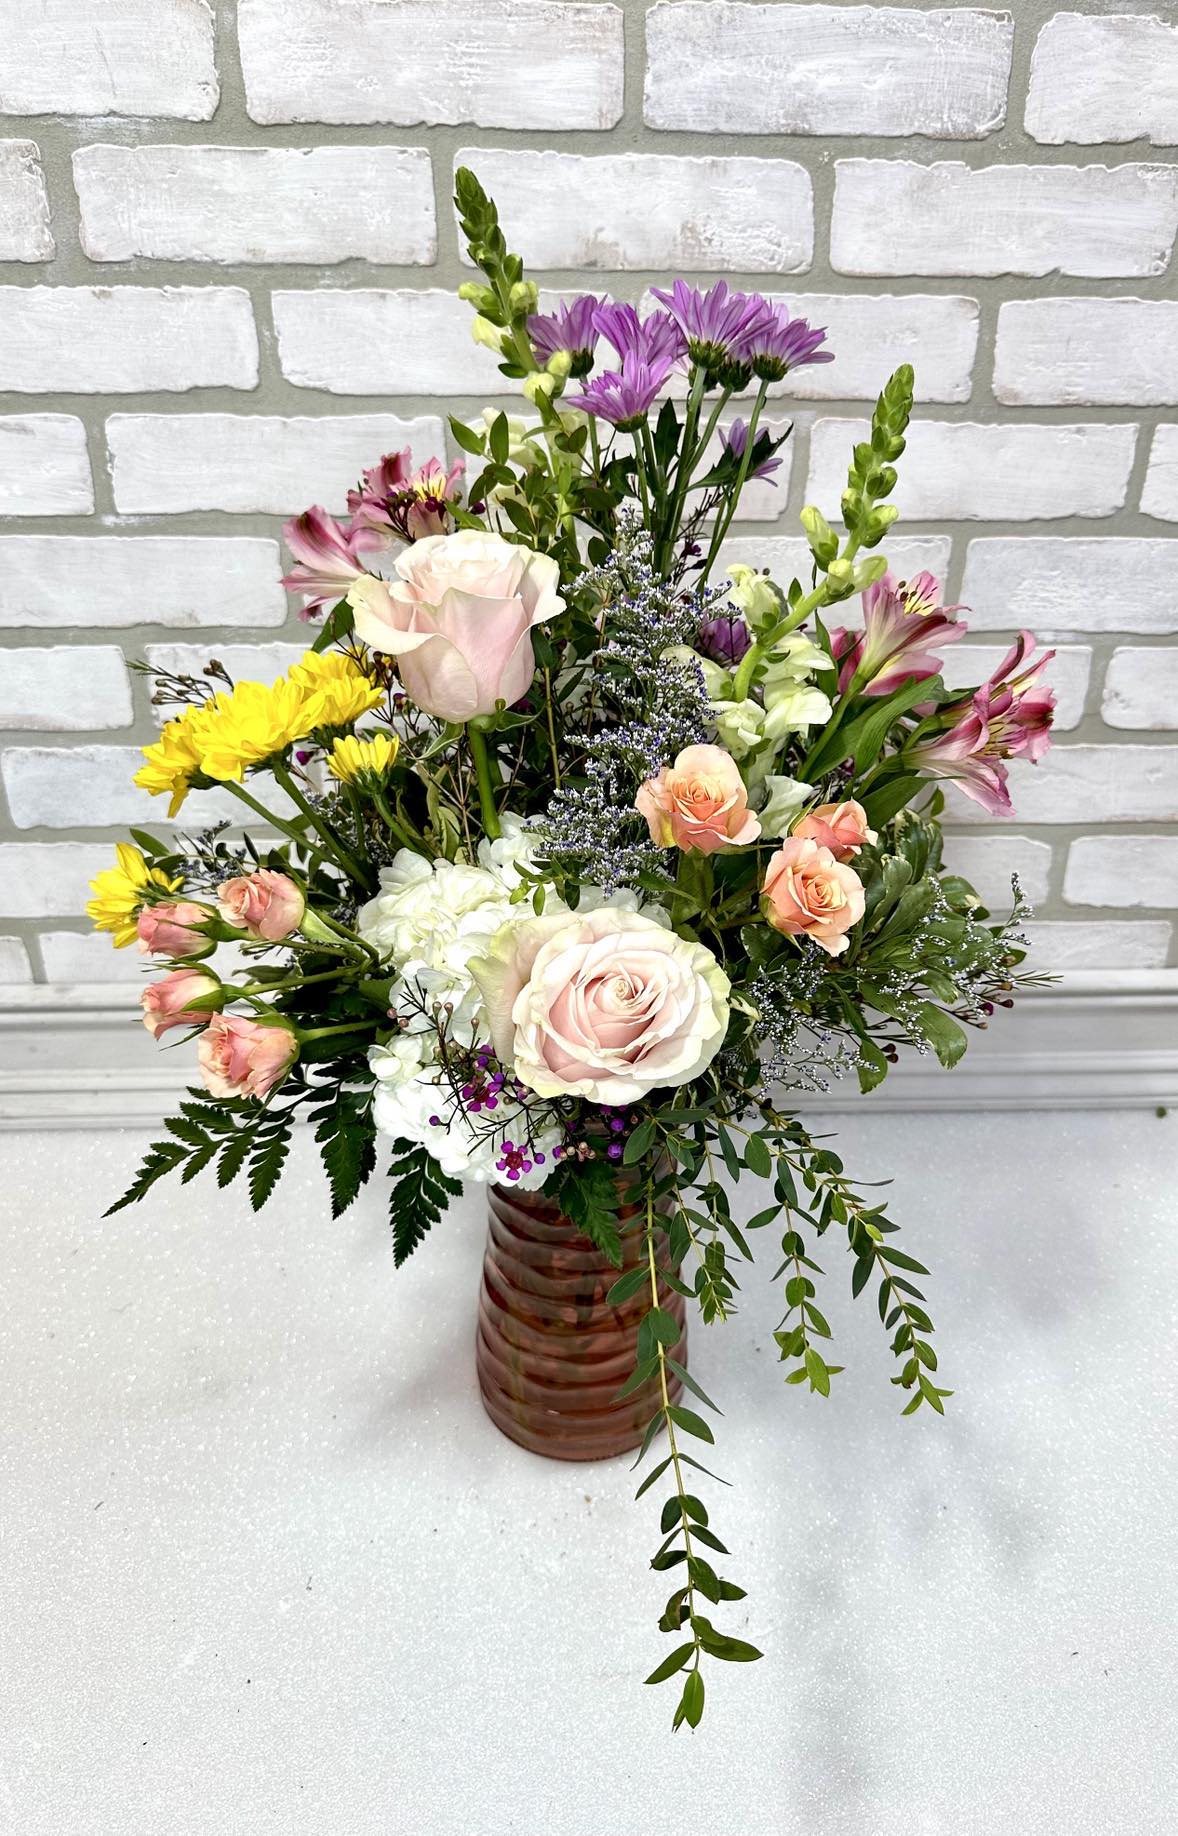 Heaven Scent - Spring flowers designed in a keepsake container, this arrangement sophisticated and timeless. *Colors may change due to availability*  